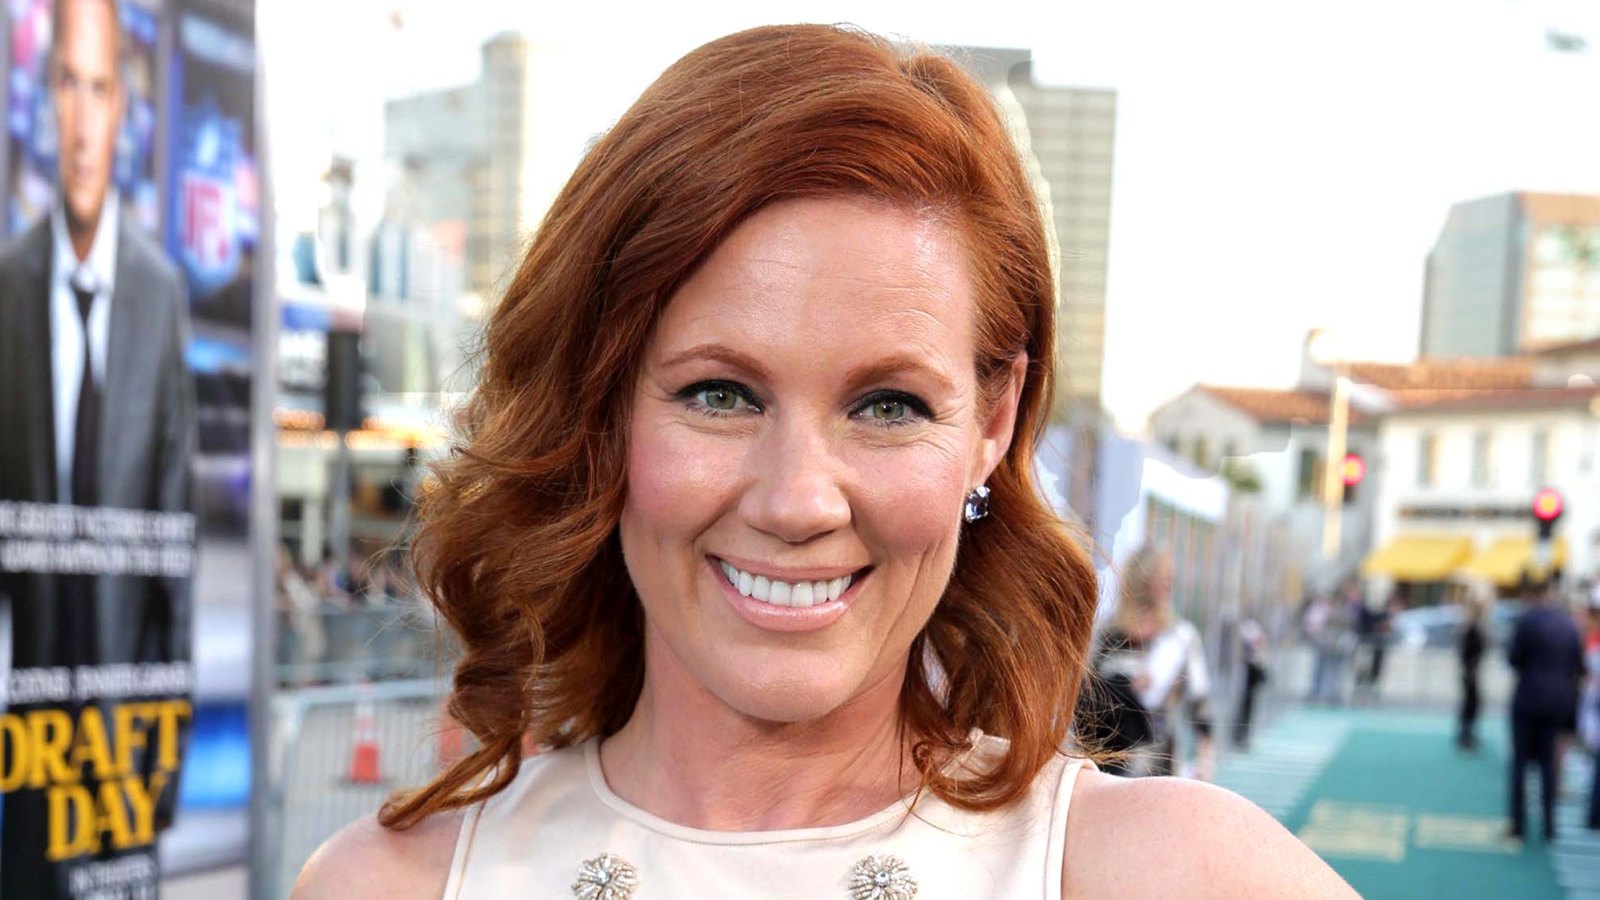 Clueless Elisa Donovan Nearly Had Heart Attack While Filming